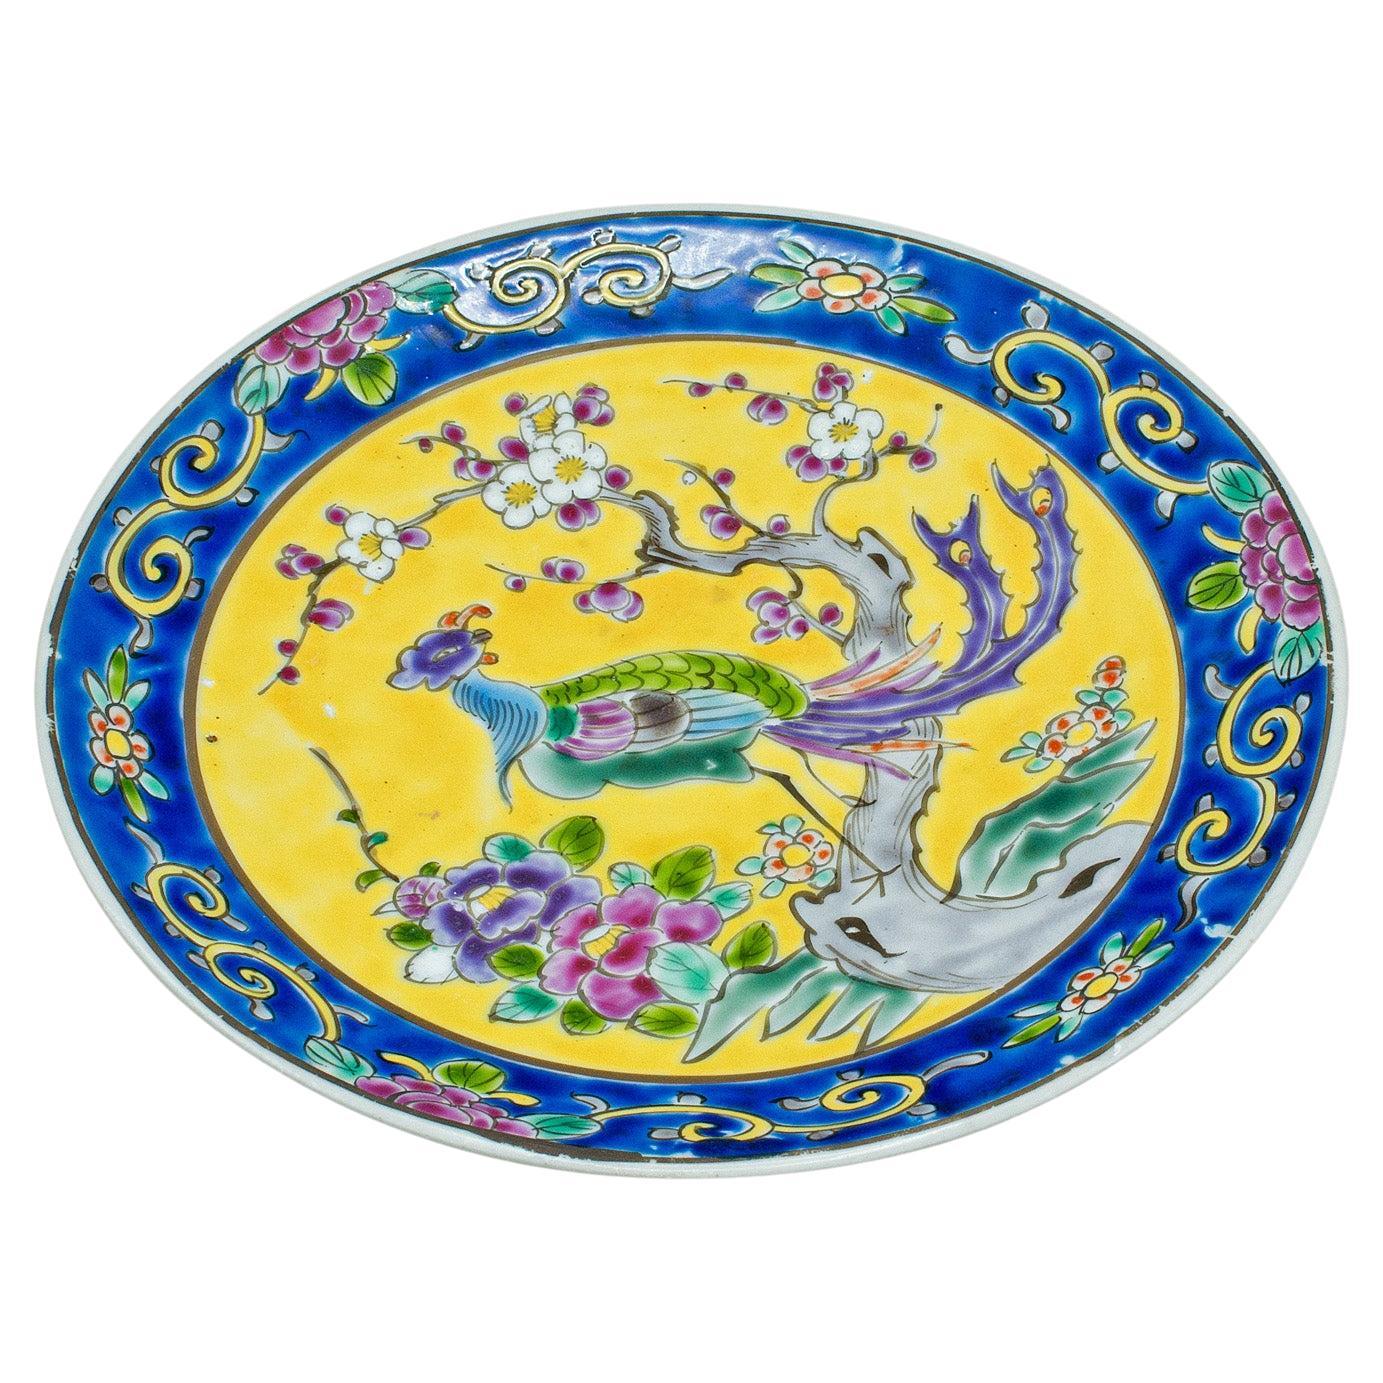 Antique Decorative Plate, Chinese, Display Plate, Famille Jaune, Victorian, Qing For Sale